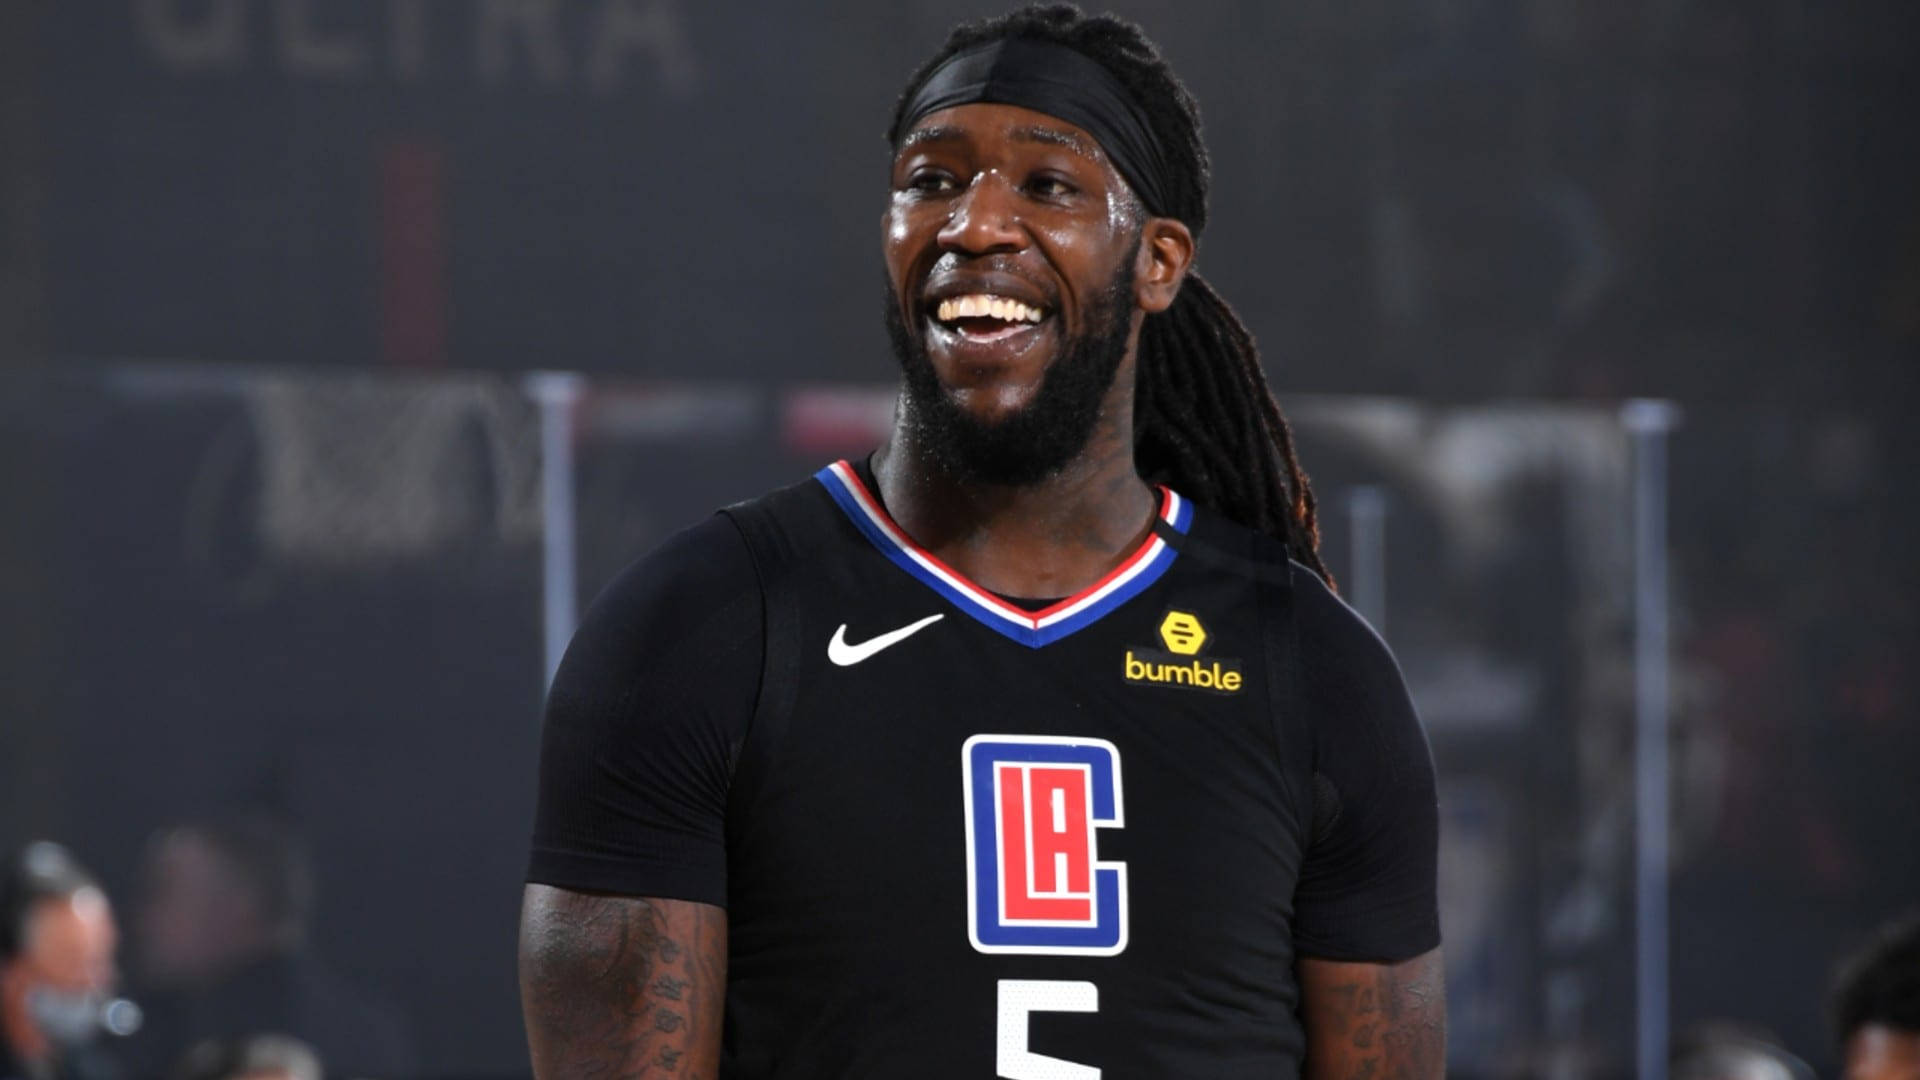 Smiling Montrezl Harrell, Player Of The Clippers, During A Game Background